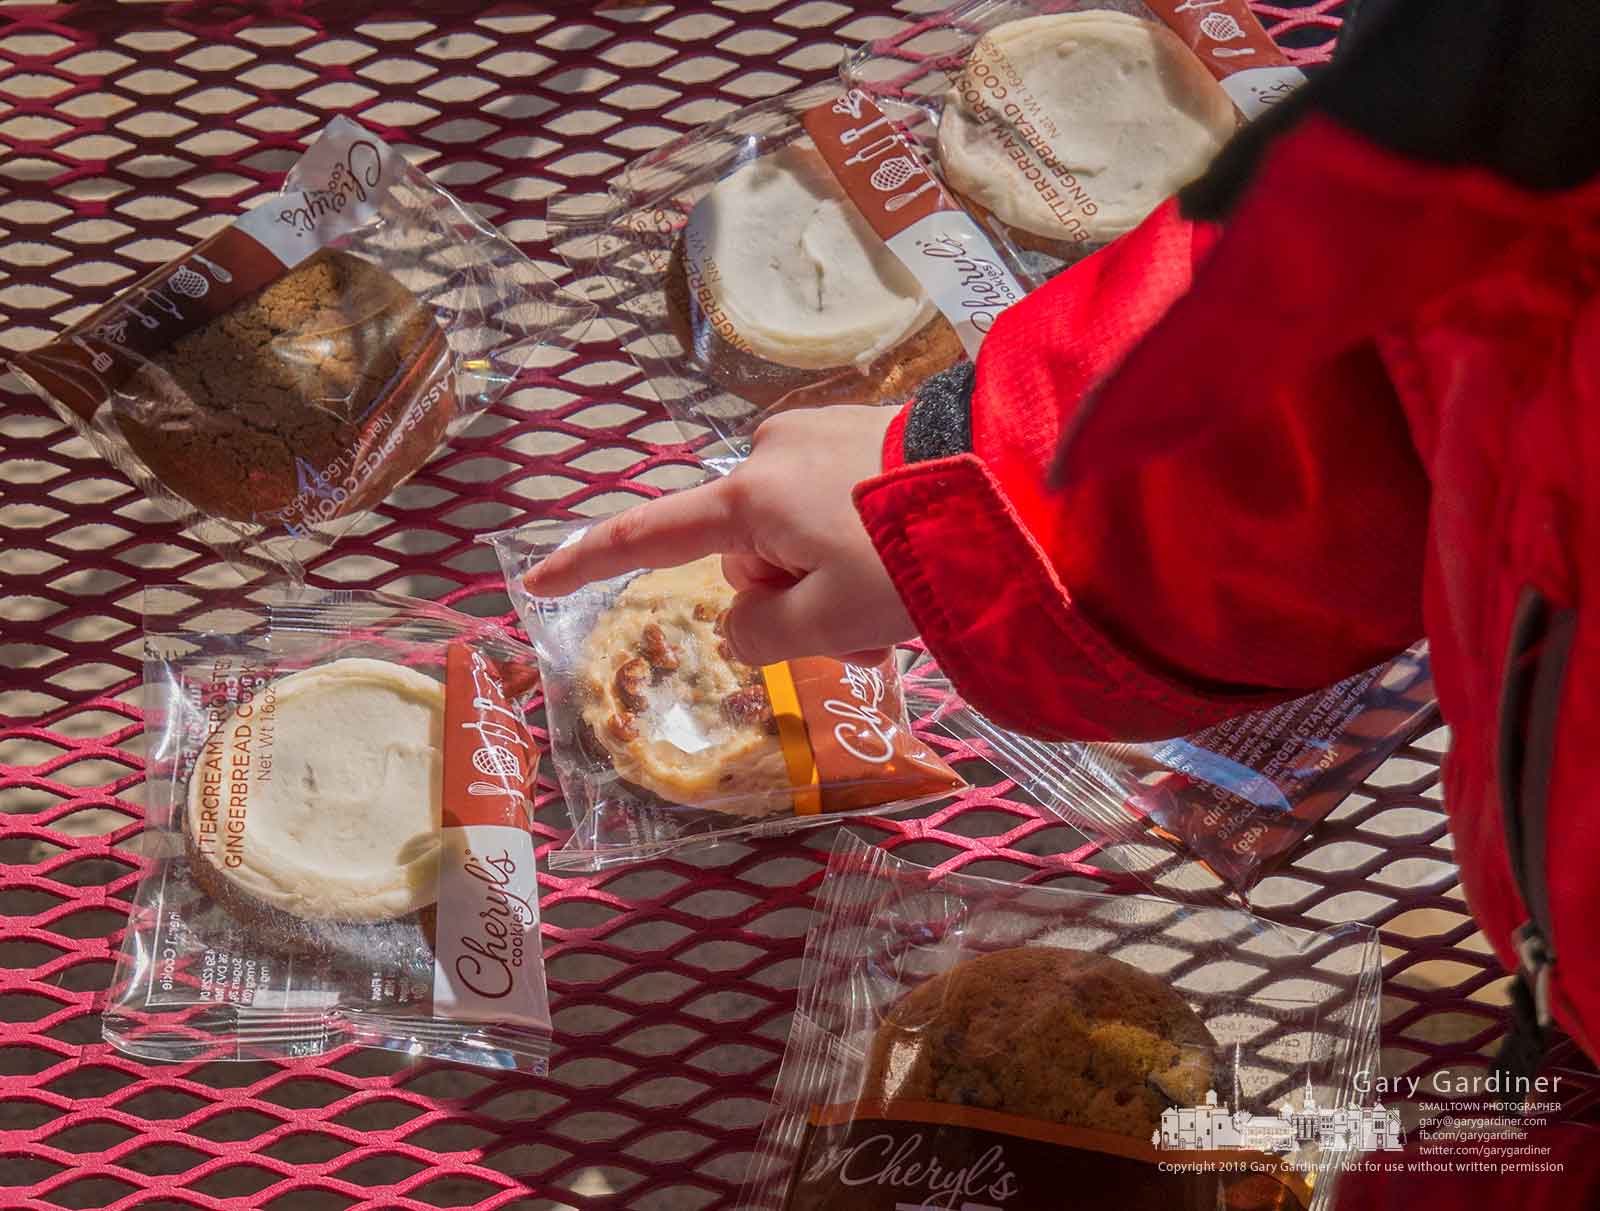 A young boy points out his choice for the buttercream frosting gingerbread cookie from the ones he collected during the Uptown Cookie Walk to help raise money for the families of two Westerville police officers who were killed. My Final Photo for March 3, 2018.